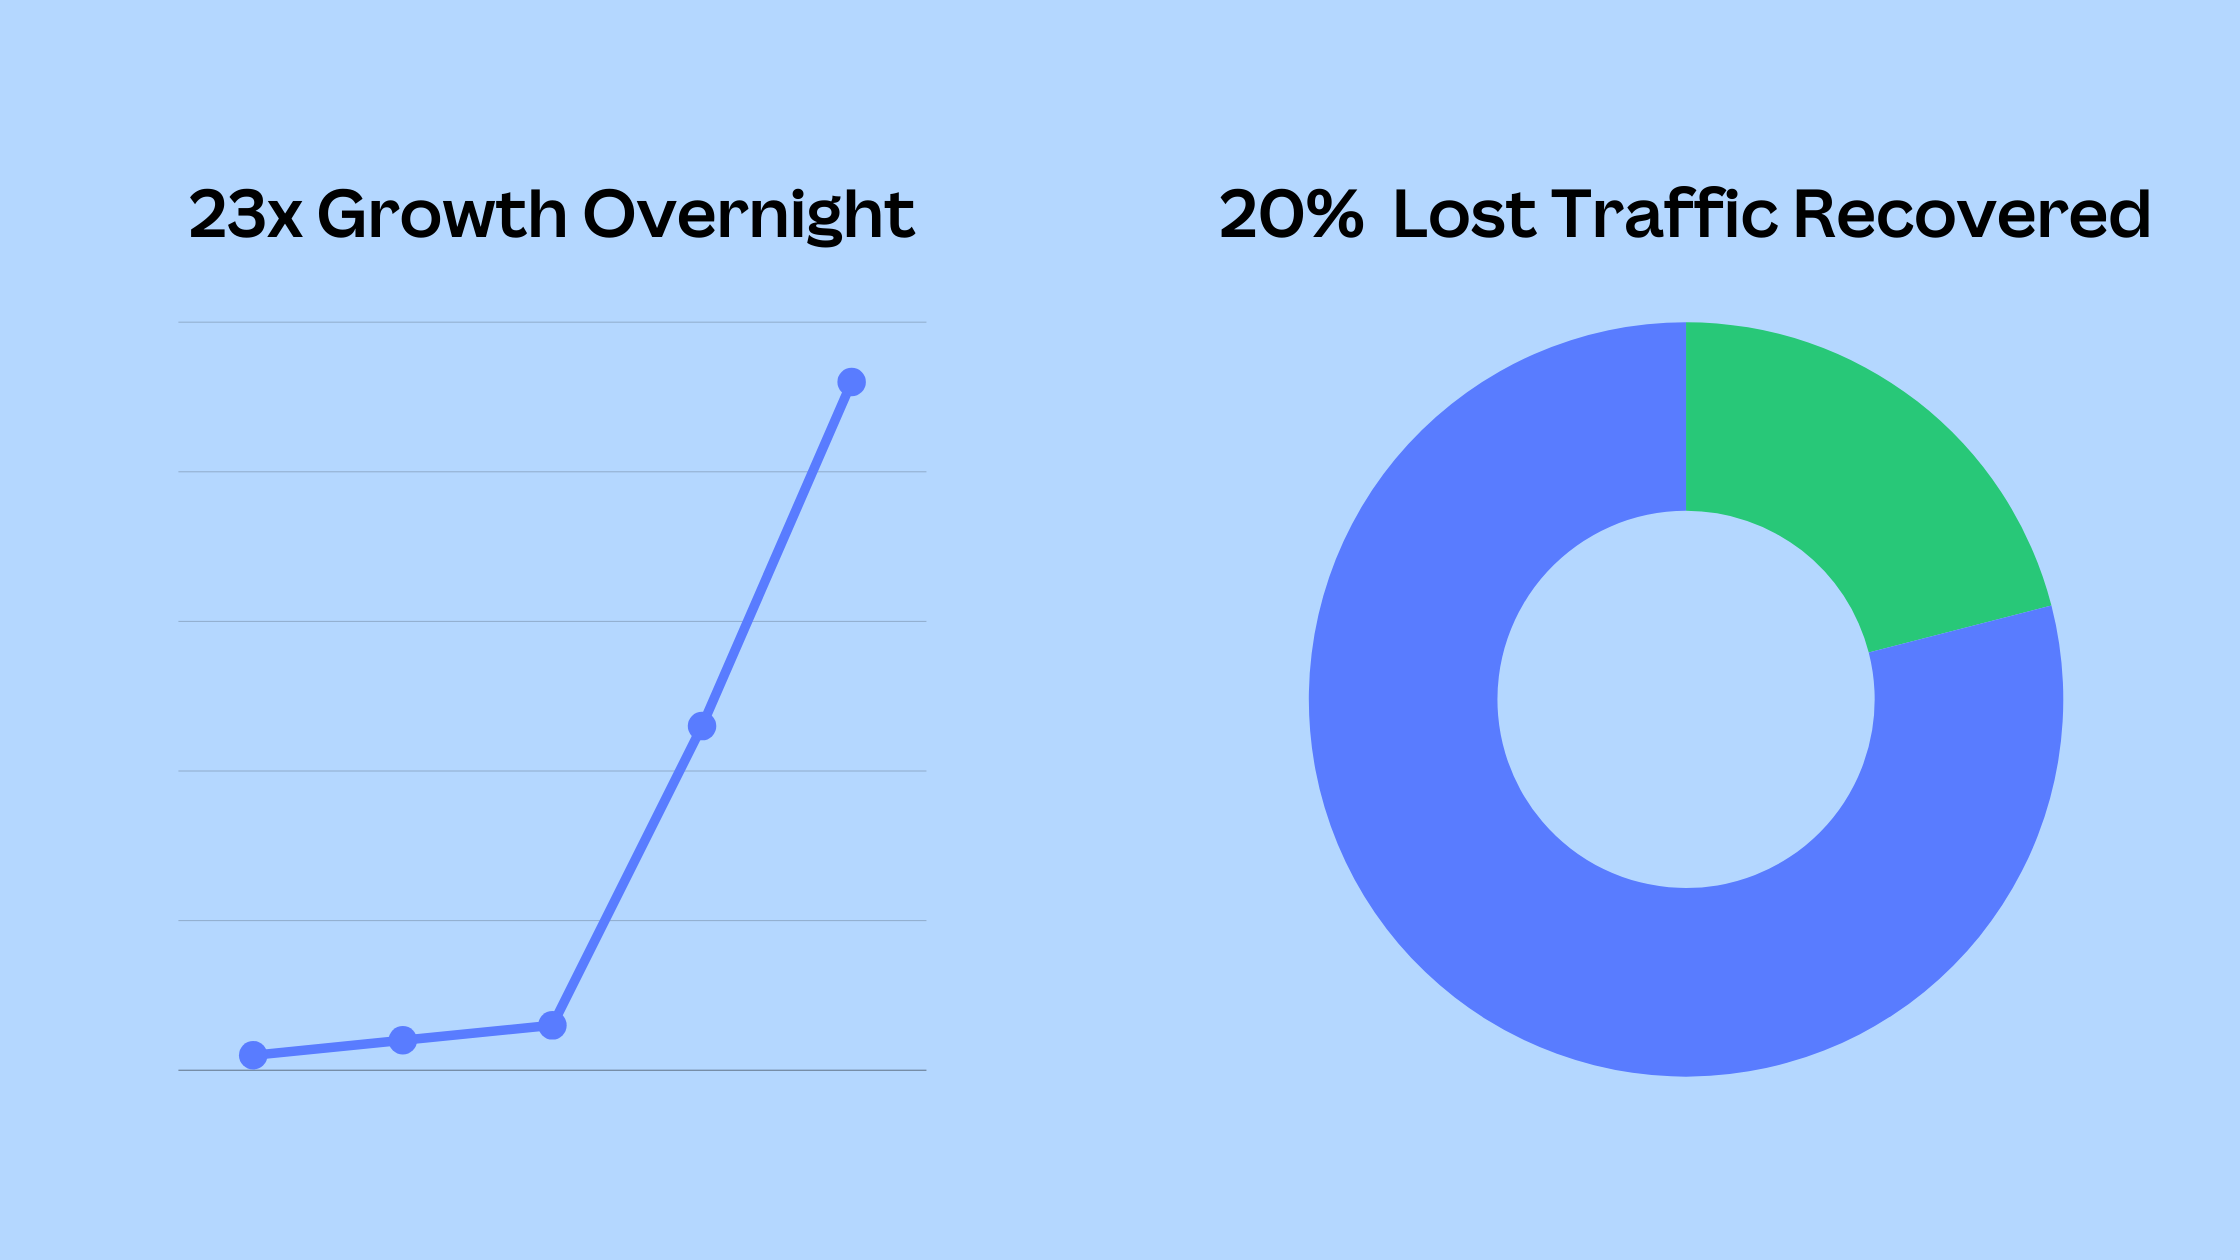 23x Growth Overnight, 20% Lost traffic recovered